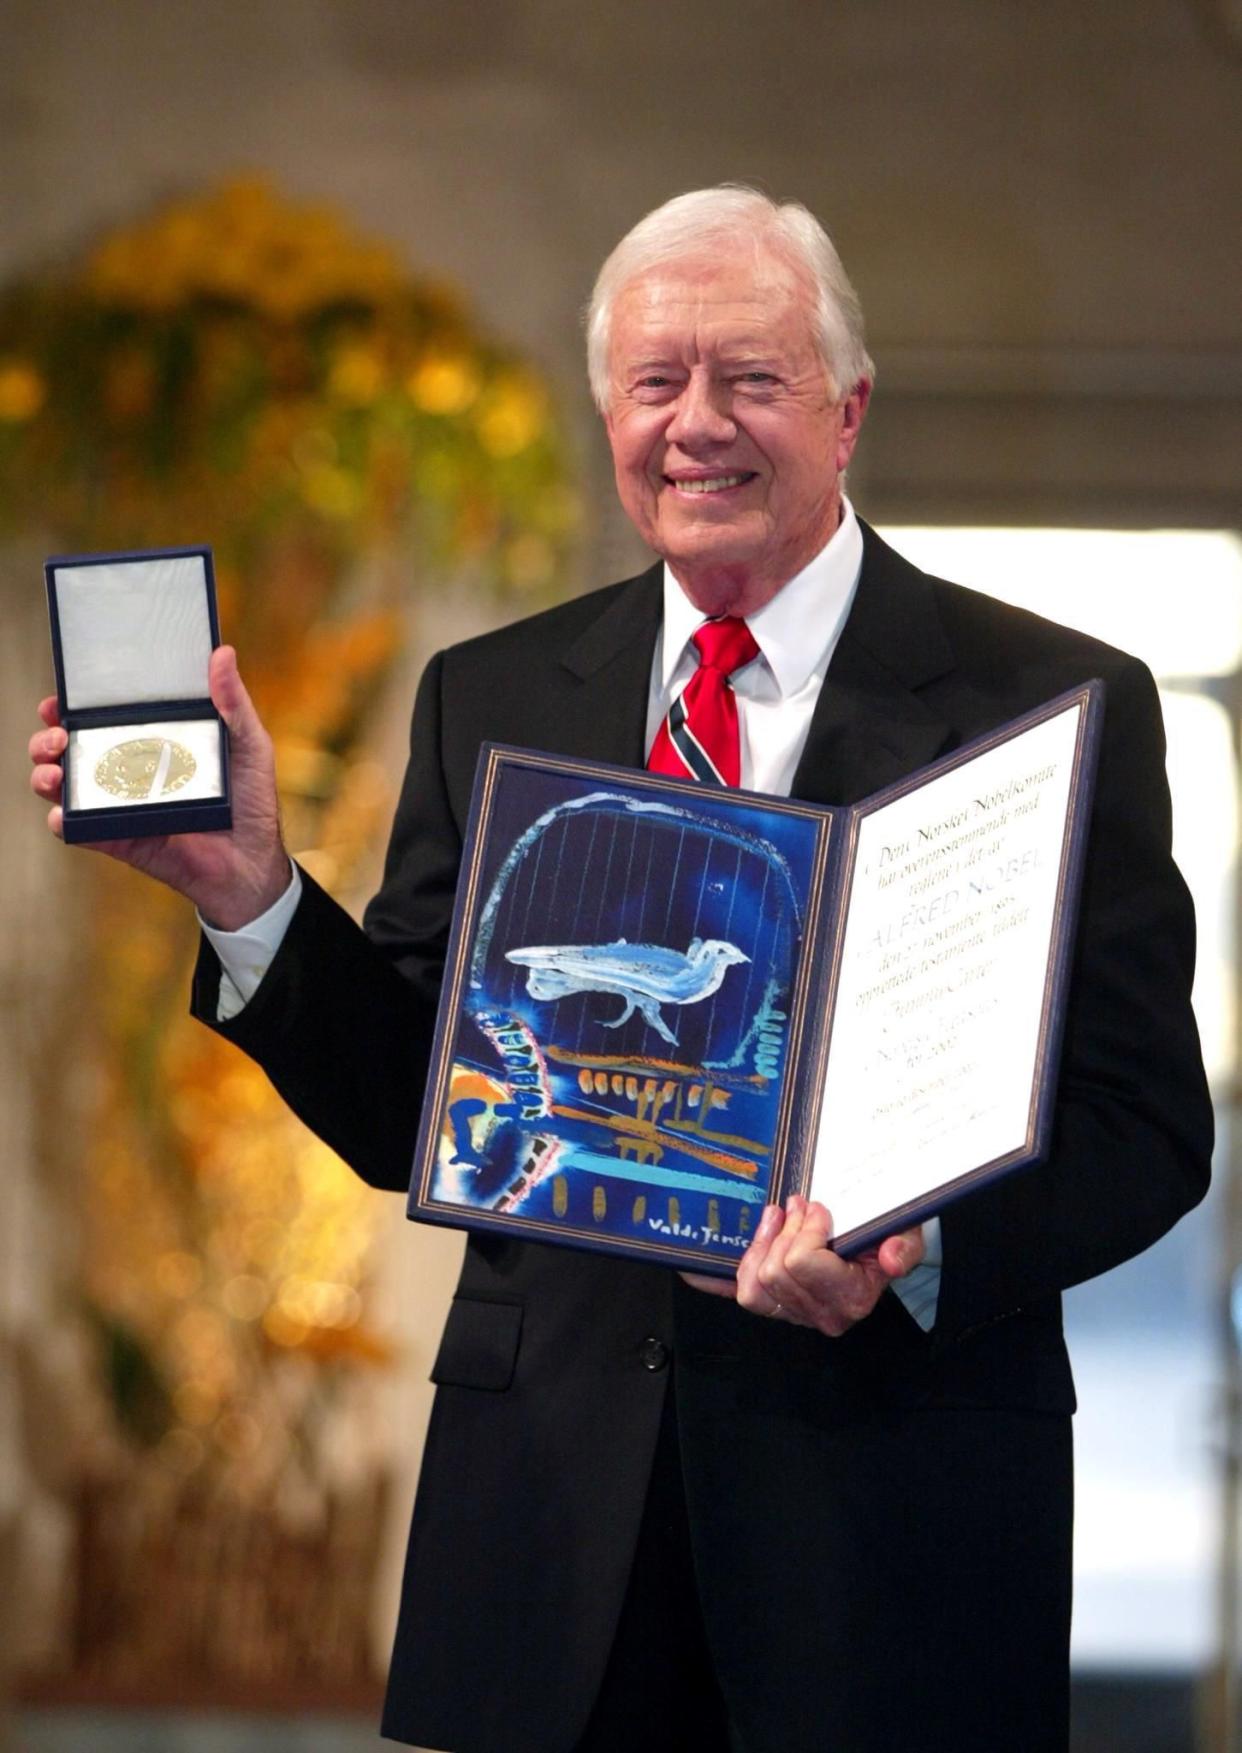 Former President Jimmy Carter smiles after receiving the 2002 Nobel Peace Prize during a ceremony in the Oslo City Hall on Dec. 10, 2002, in Oslo, Norway.